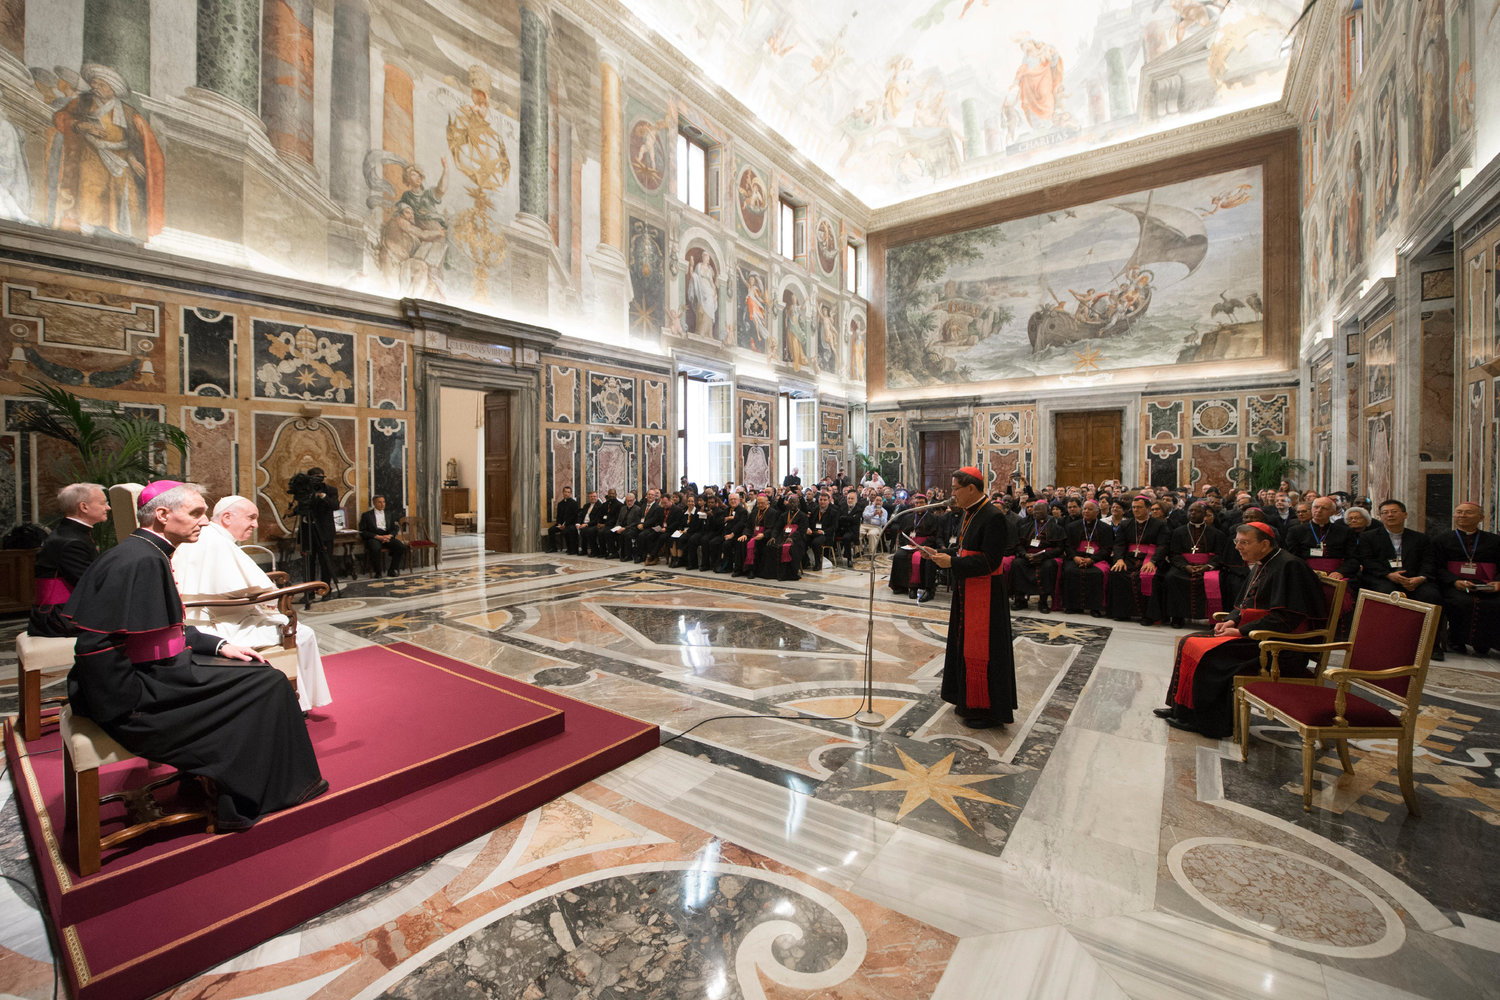 Pope Francis listens as Philippine Cardinal Luis Antonio Tagle of Manila, president of the Catholic Biblical Federation, speaks April 26, 2019, at the Vatican during a special audience marking the federation’s 50th anniversary. Seated to the Pope’s right is Archbishop Georg Ganswein, prefect of the papal household.